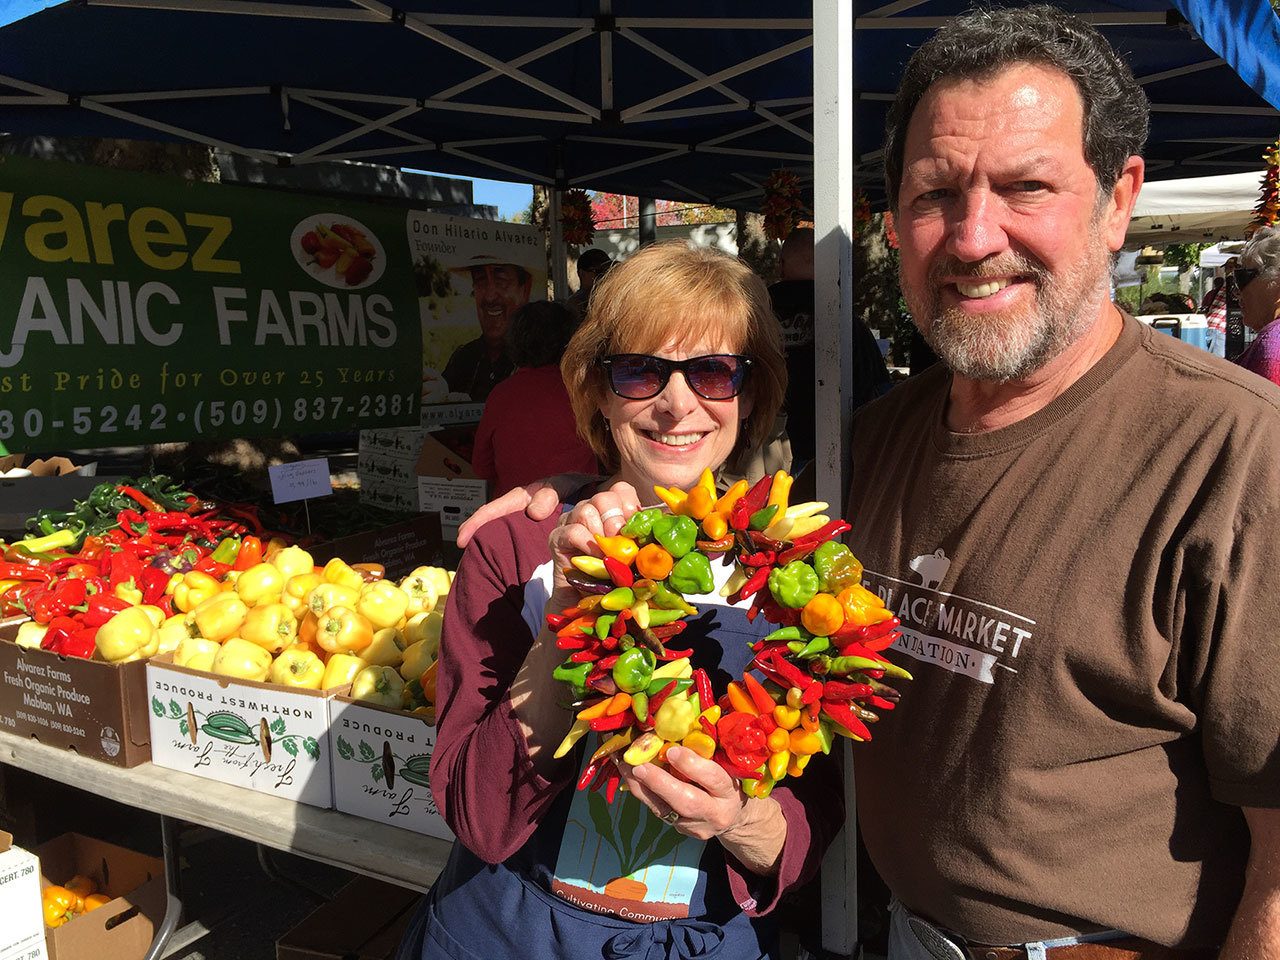 Retiring market manager Patty Spahr poses with her husband at the Mercer Island Farmers Market. Contributed photo